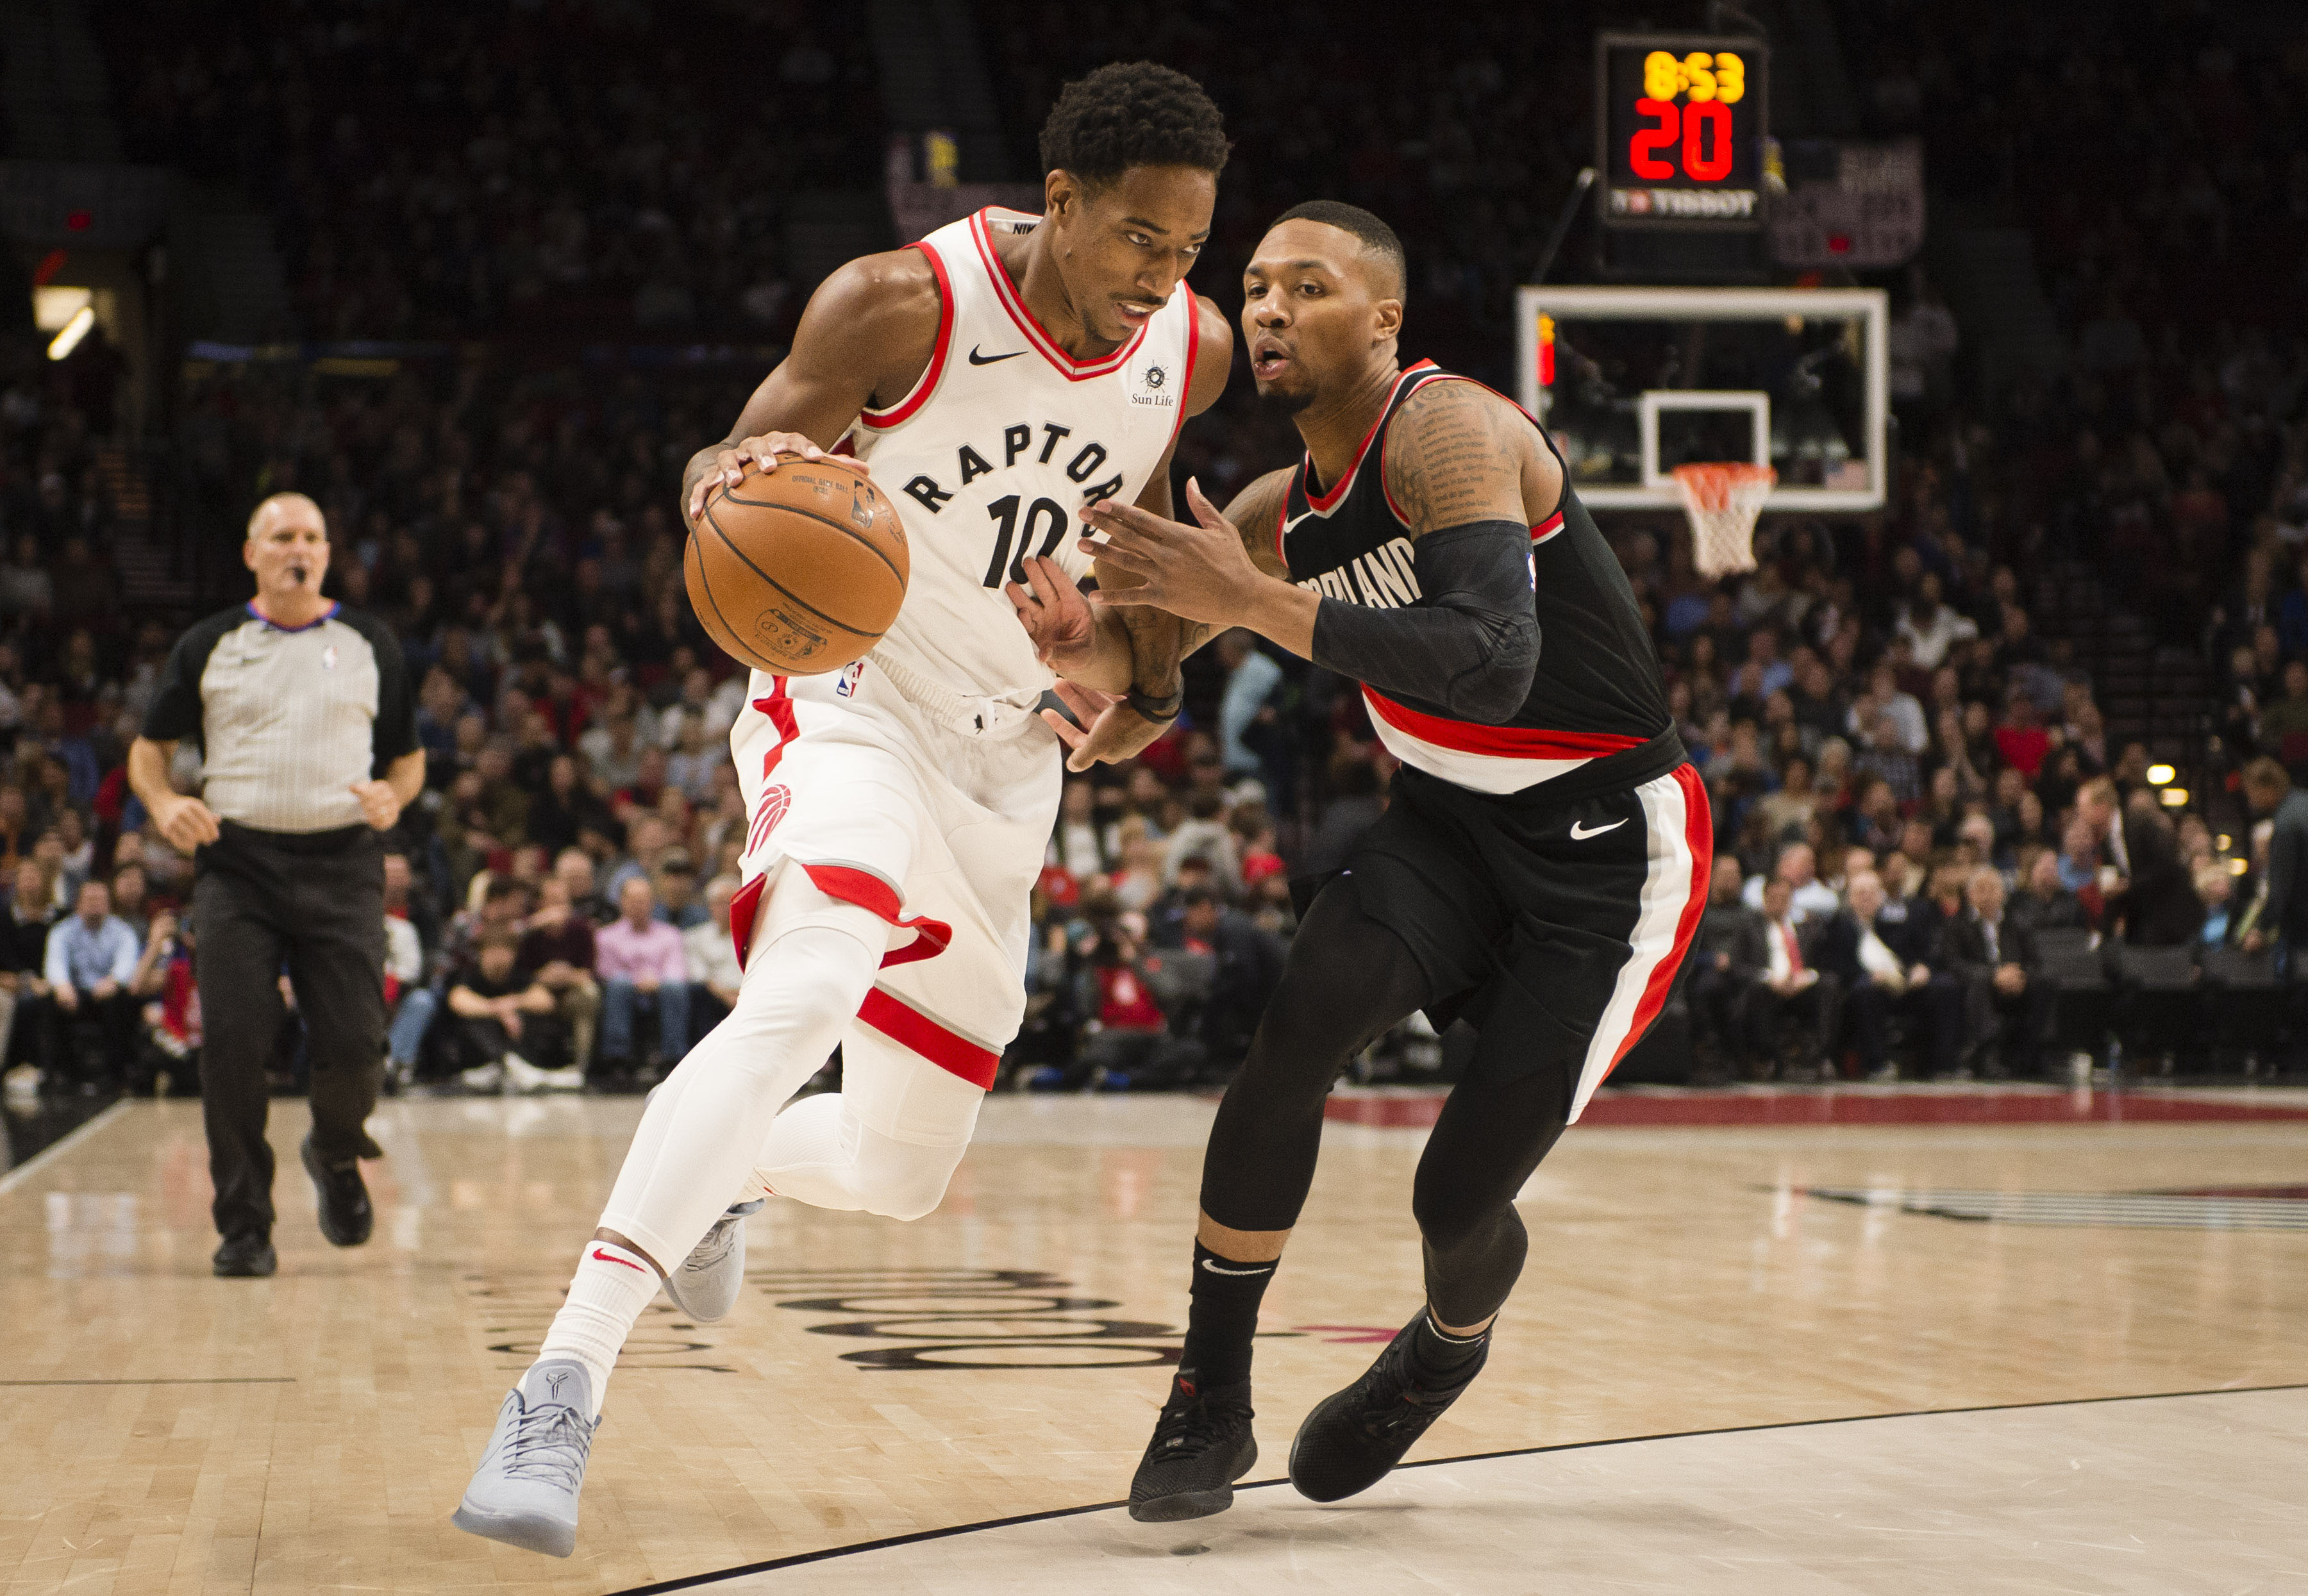 Montreal Welcomes Raptors Preseason Game with Playoff Atmosphere